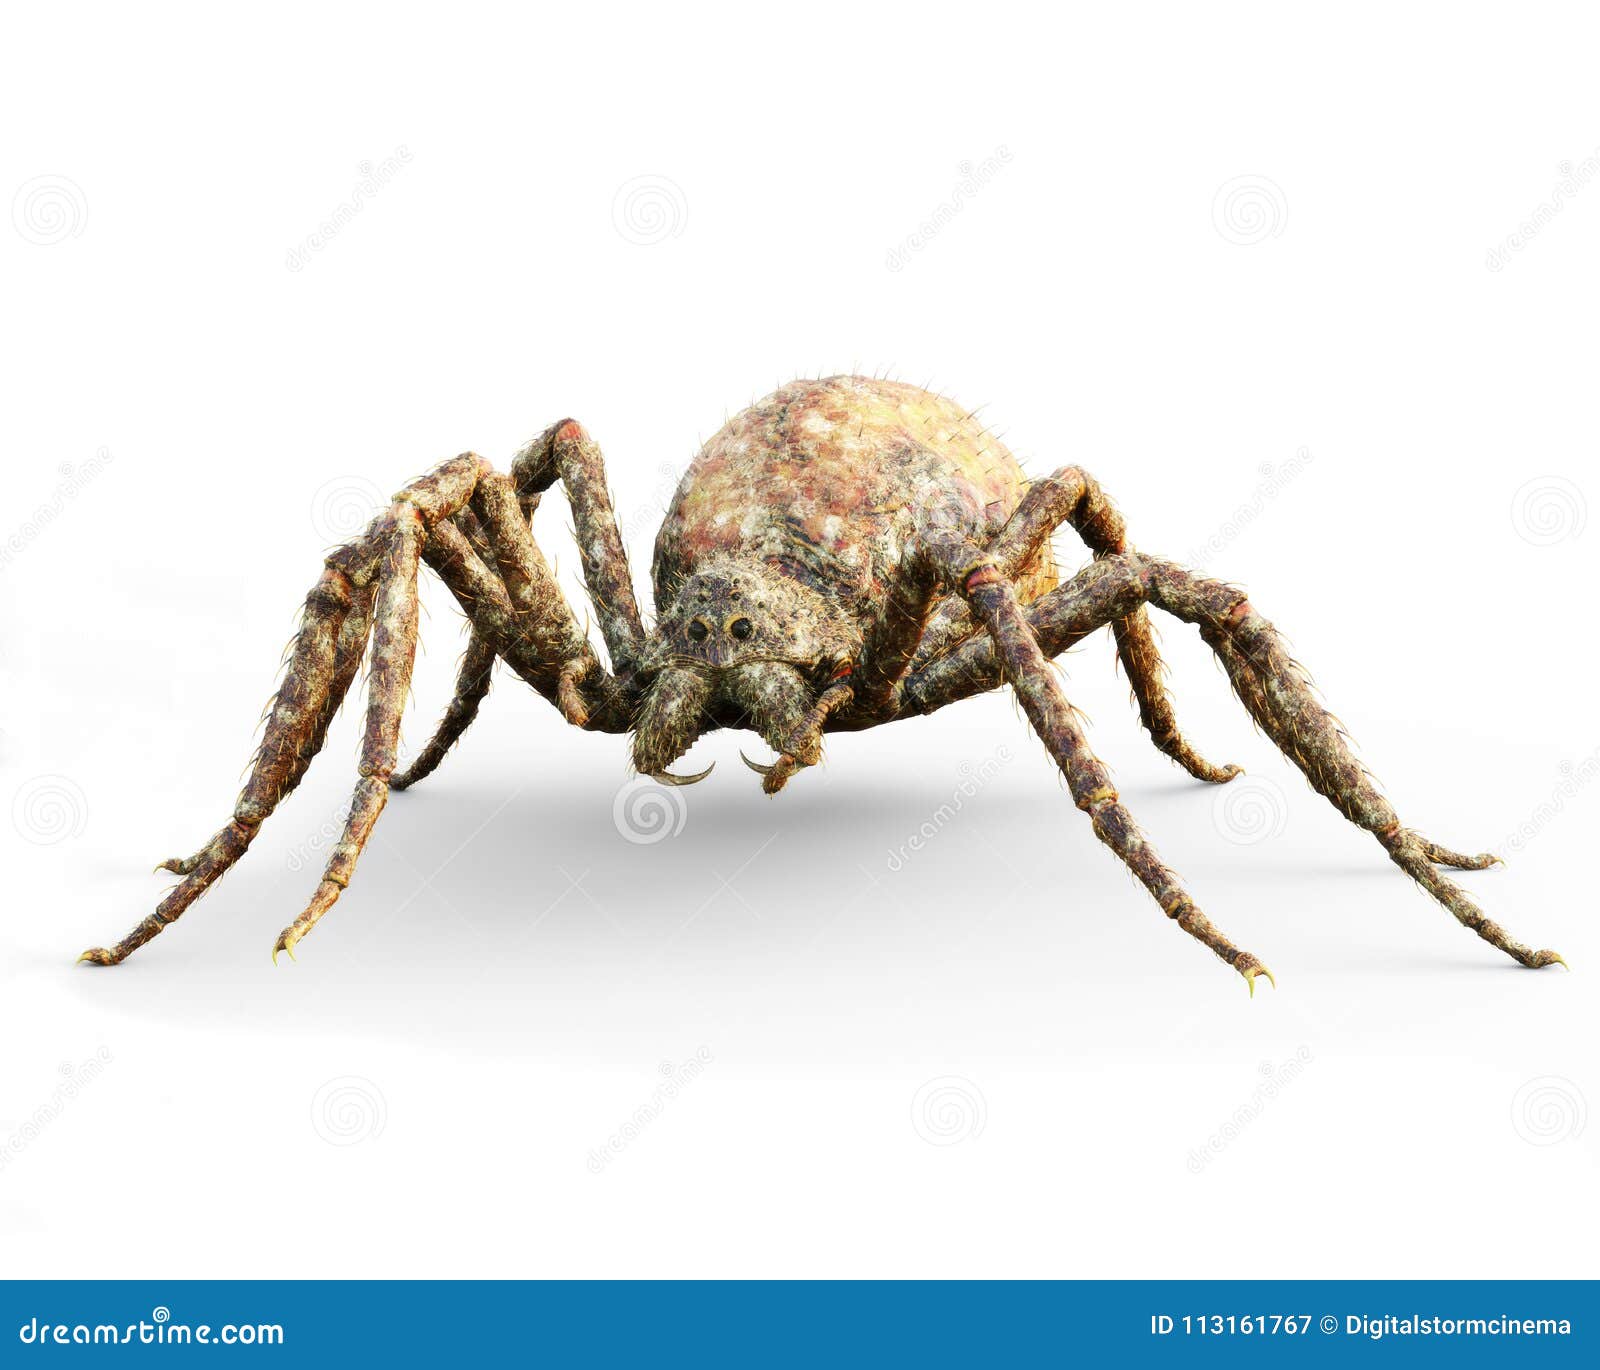 enormous plague ridden fantasy spider on a white background